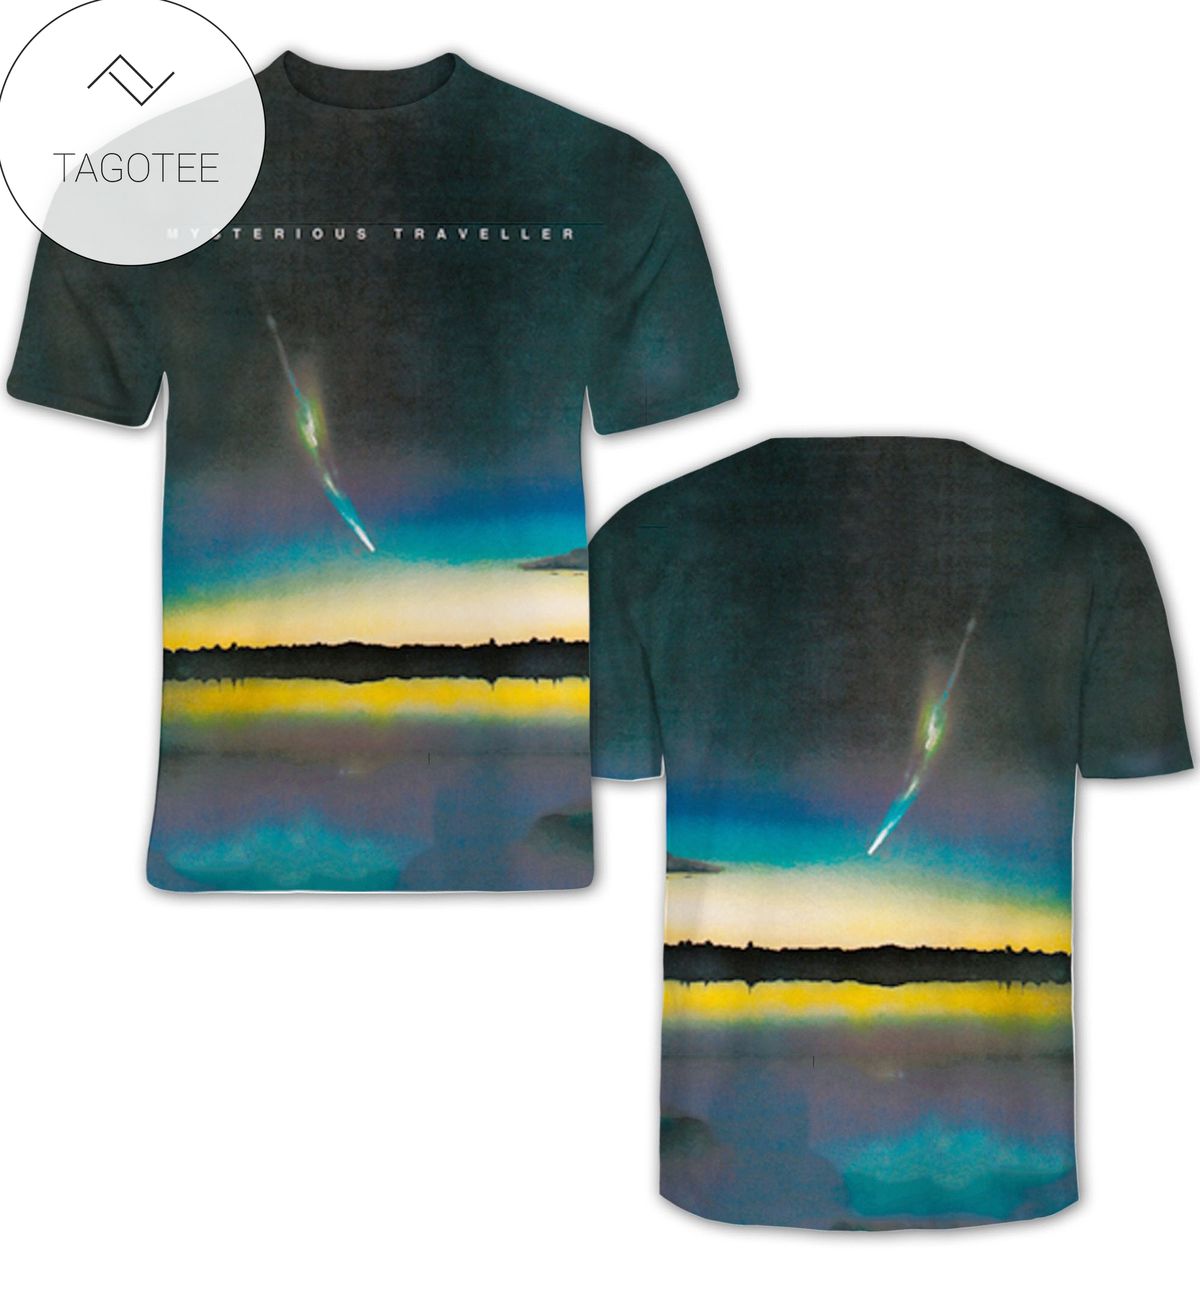 Weather Report Mysterious Traveller Album Cover Shirt